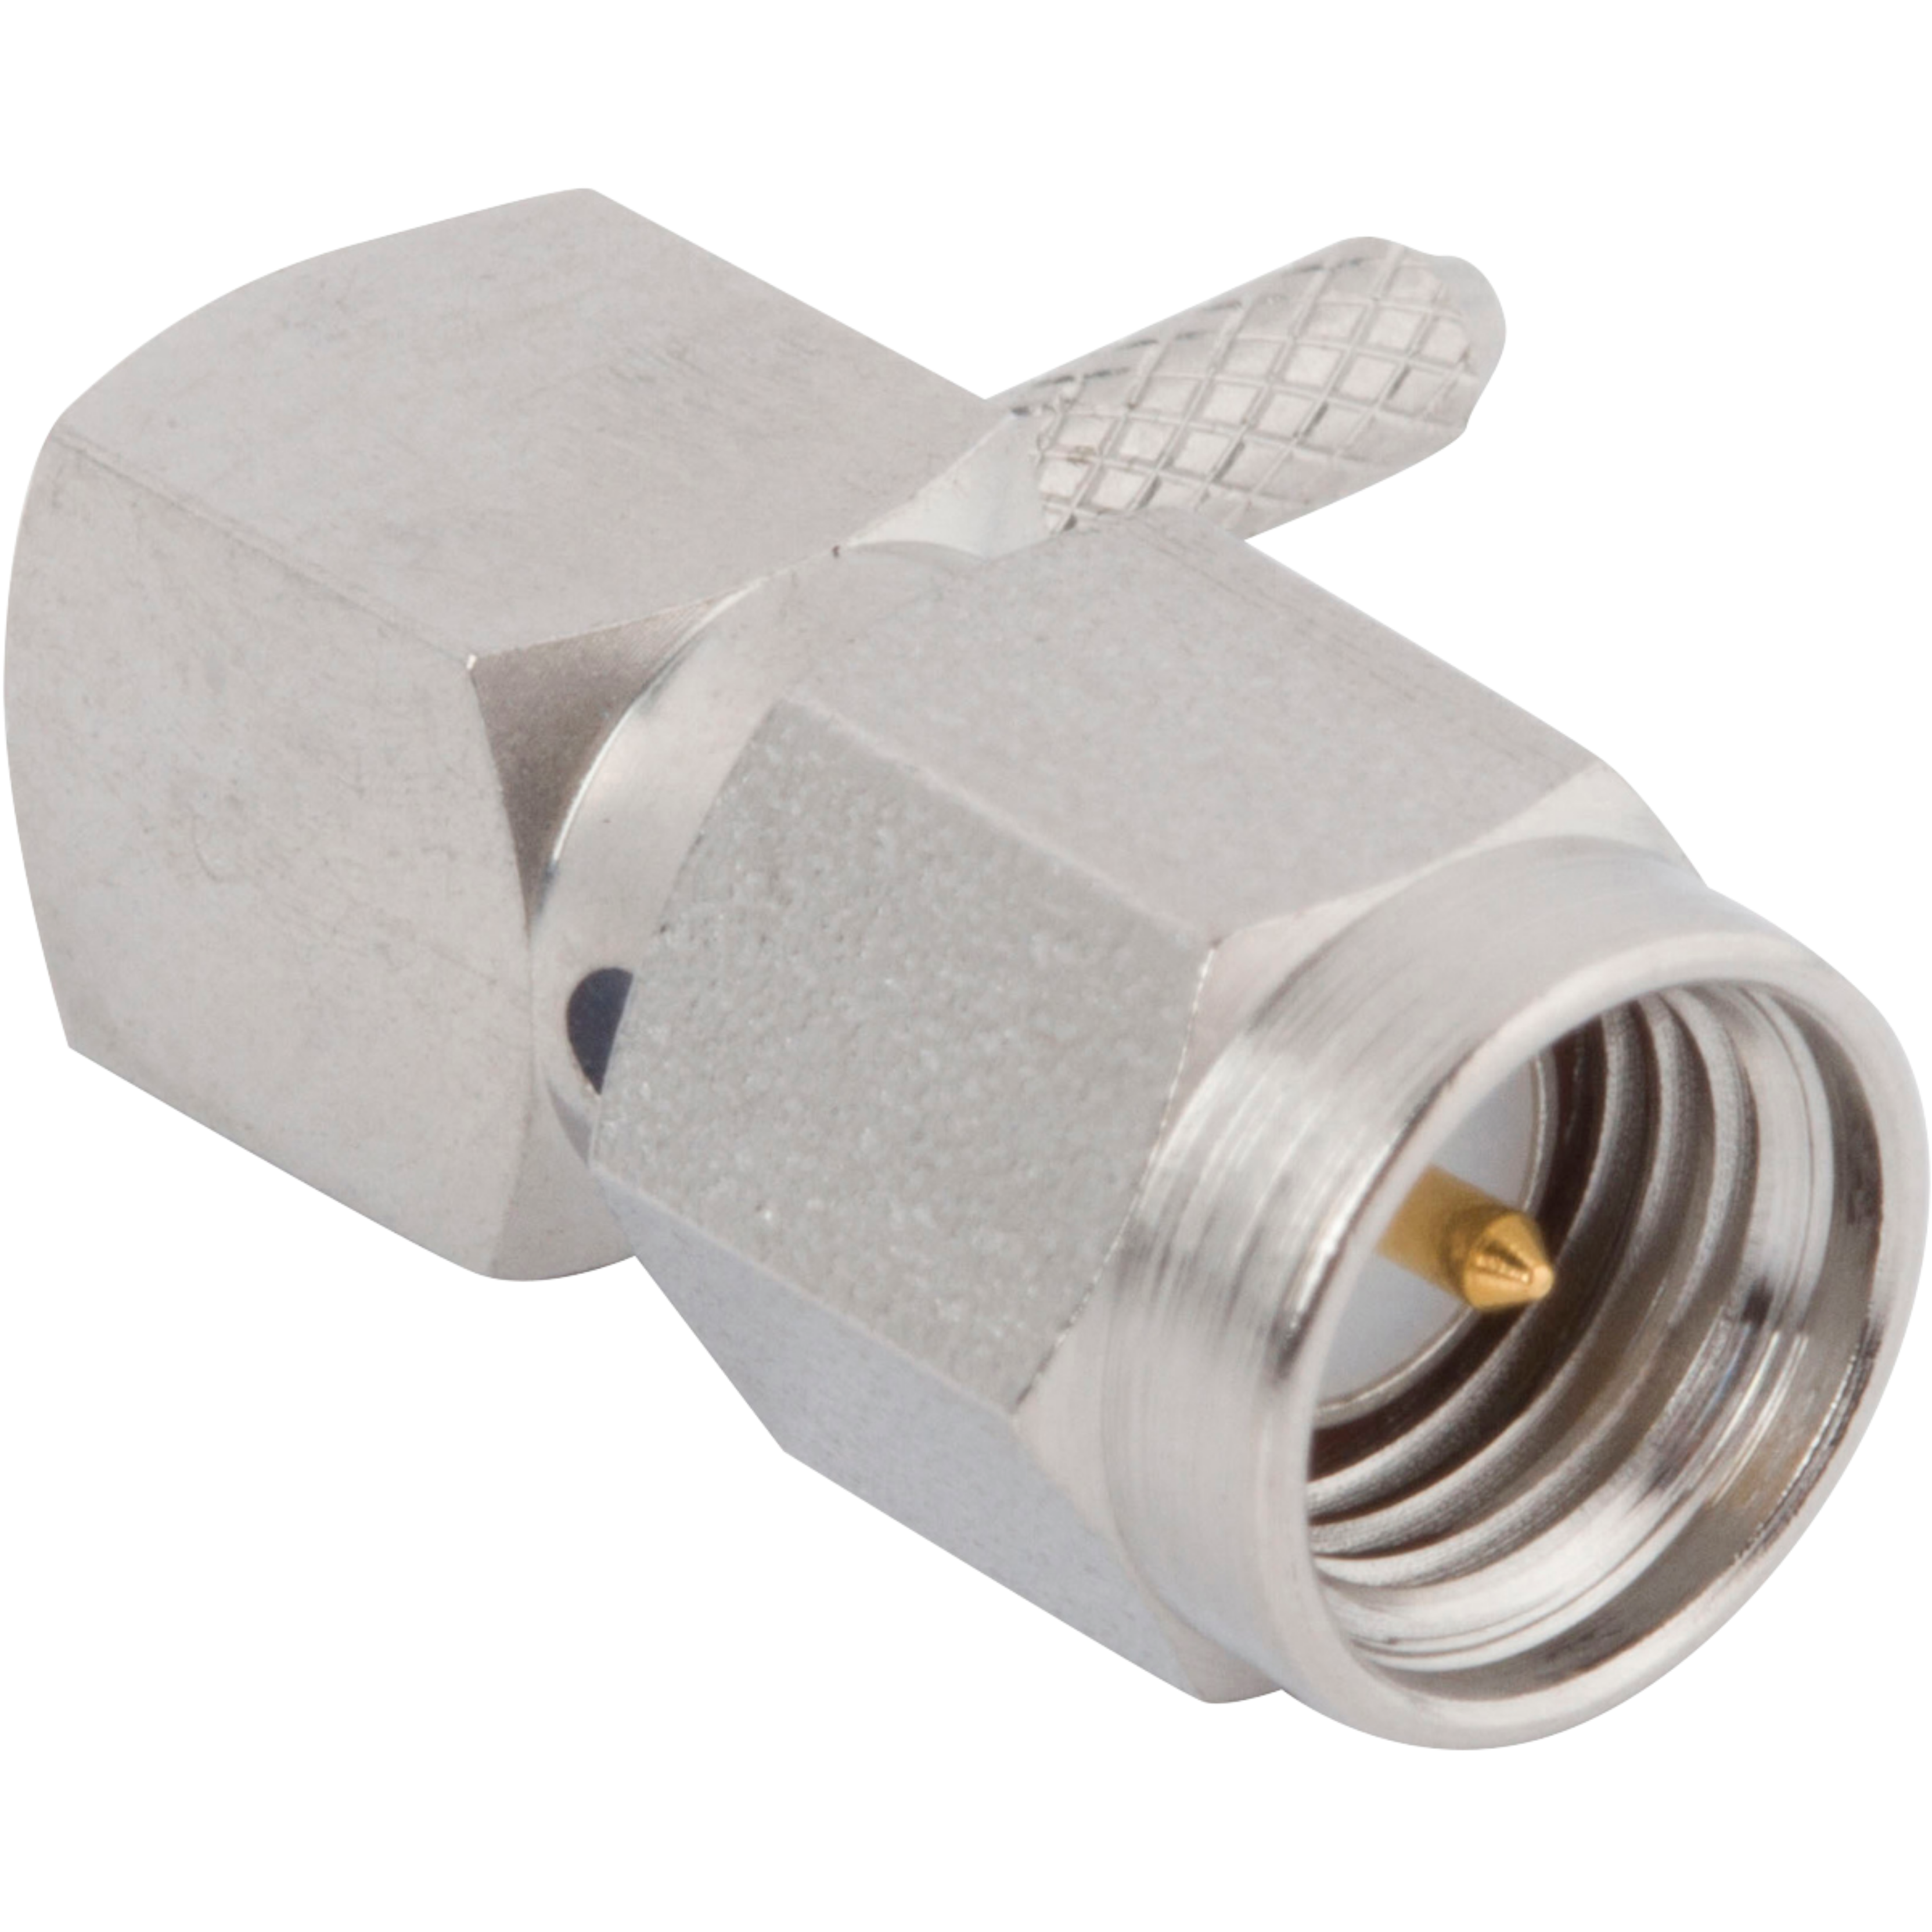 SMA Male Connector, R/A for RG-58 Cable, M39012/56B3116